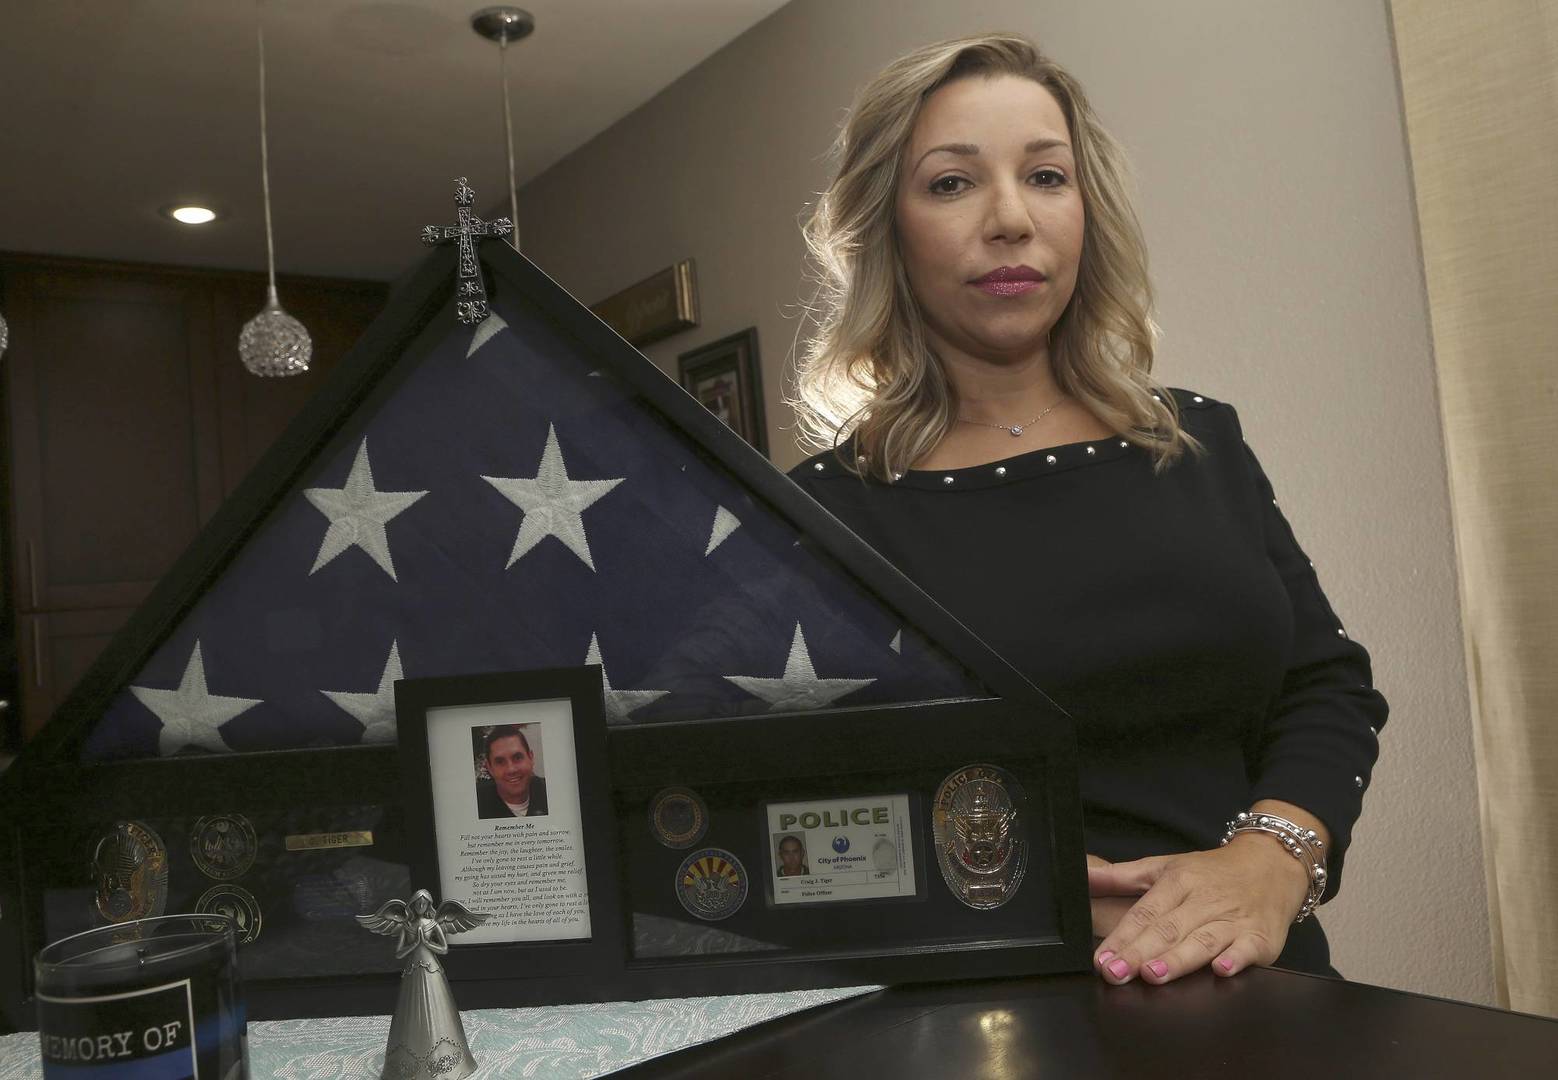 Rebecca Tiger, a former Phoenix police officer, is the widow of Craig Tiger, a Phoenix police officer who committed suicide a few years ago following a fatal shooting he was involved in, shown her home Monday, July 1, 2019, in Scottsdale, Ariz. Officer Craig Tiger suffered from post-traumatic stress disorder after fatally shooting a man while on duty back in 2012, and took his own life two years later. (AP Photo/Ross D. Franklin)